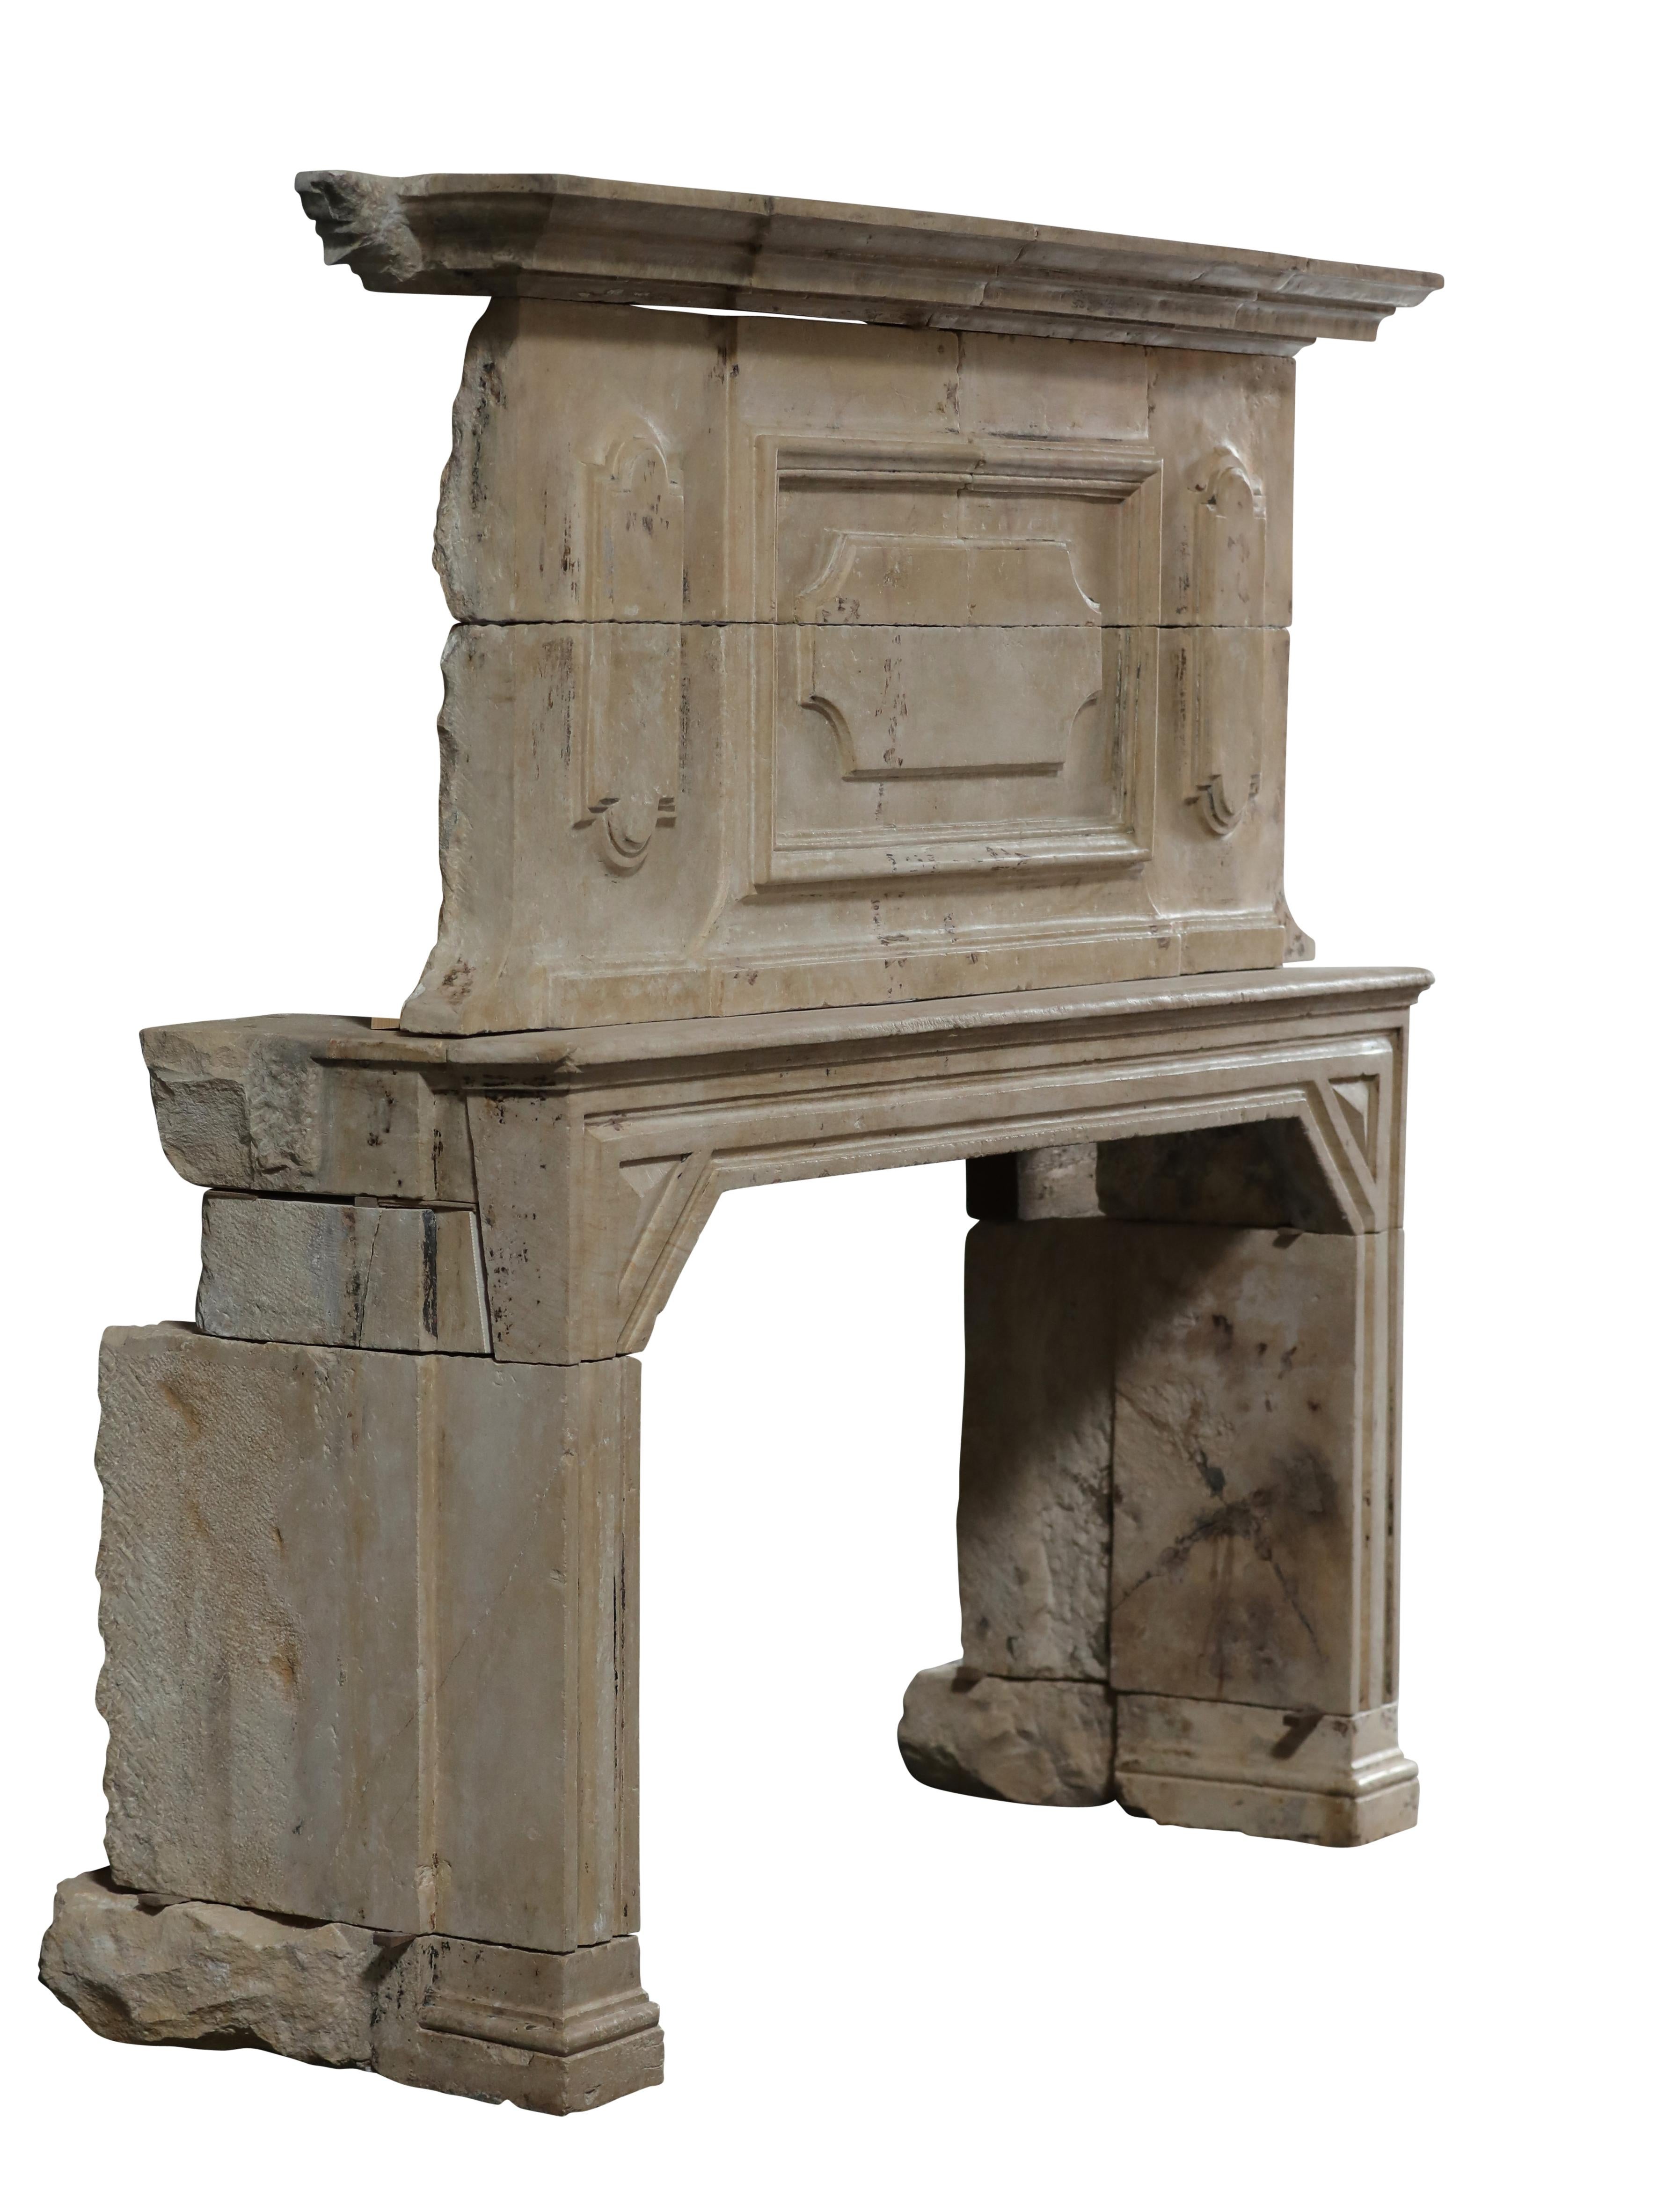 Sensational French antique fireplace surround for the connoisseur.
Late 16th - early 17th century period chateau fireplace surround in great authentic condition.
This is the kind of chateau fireplace that fits a timeless luxury living style and